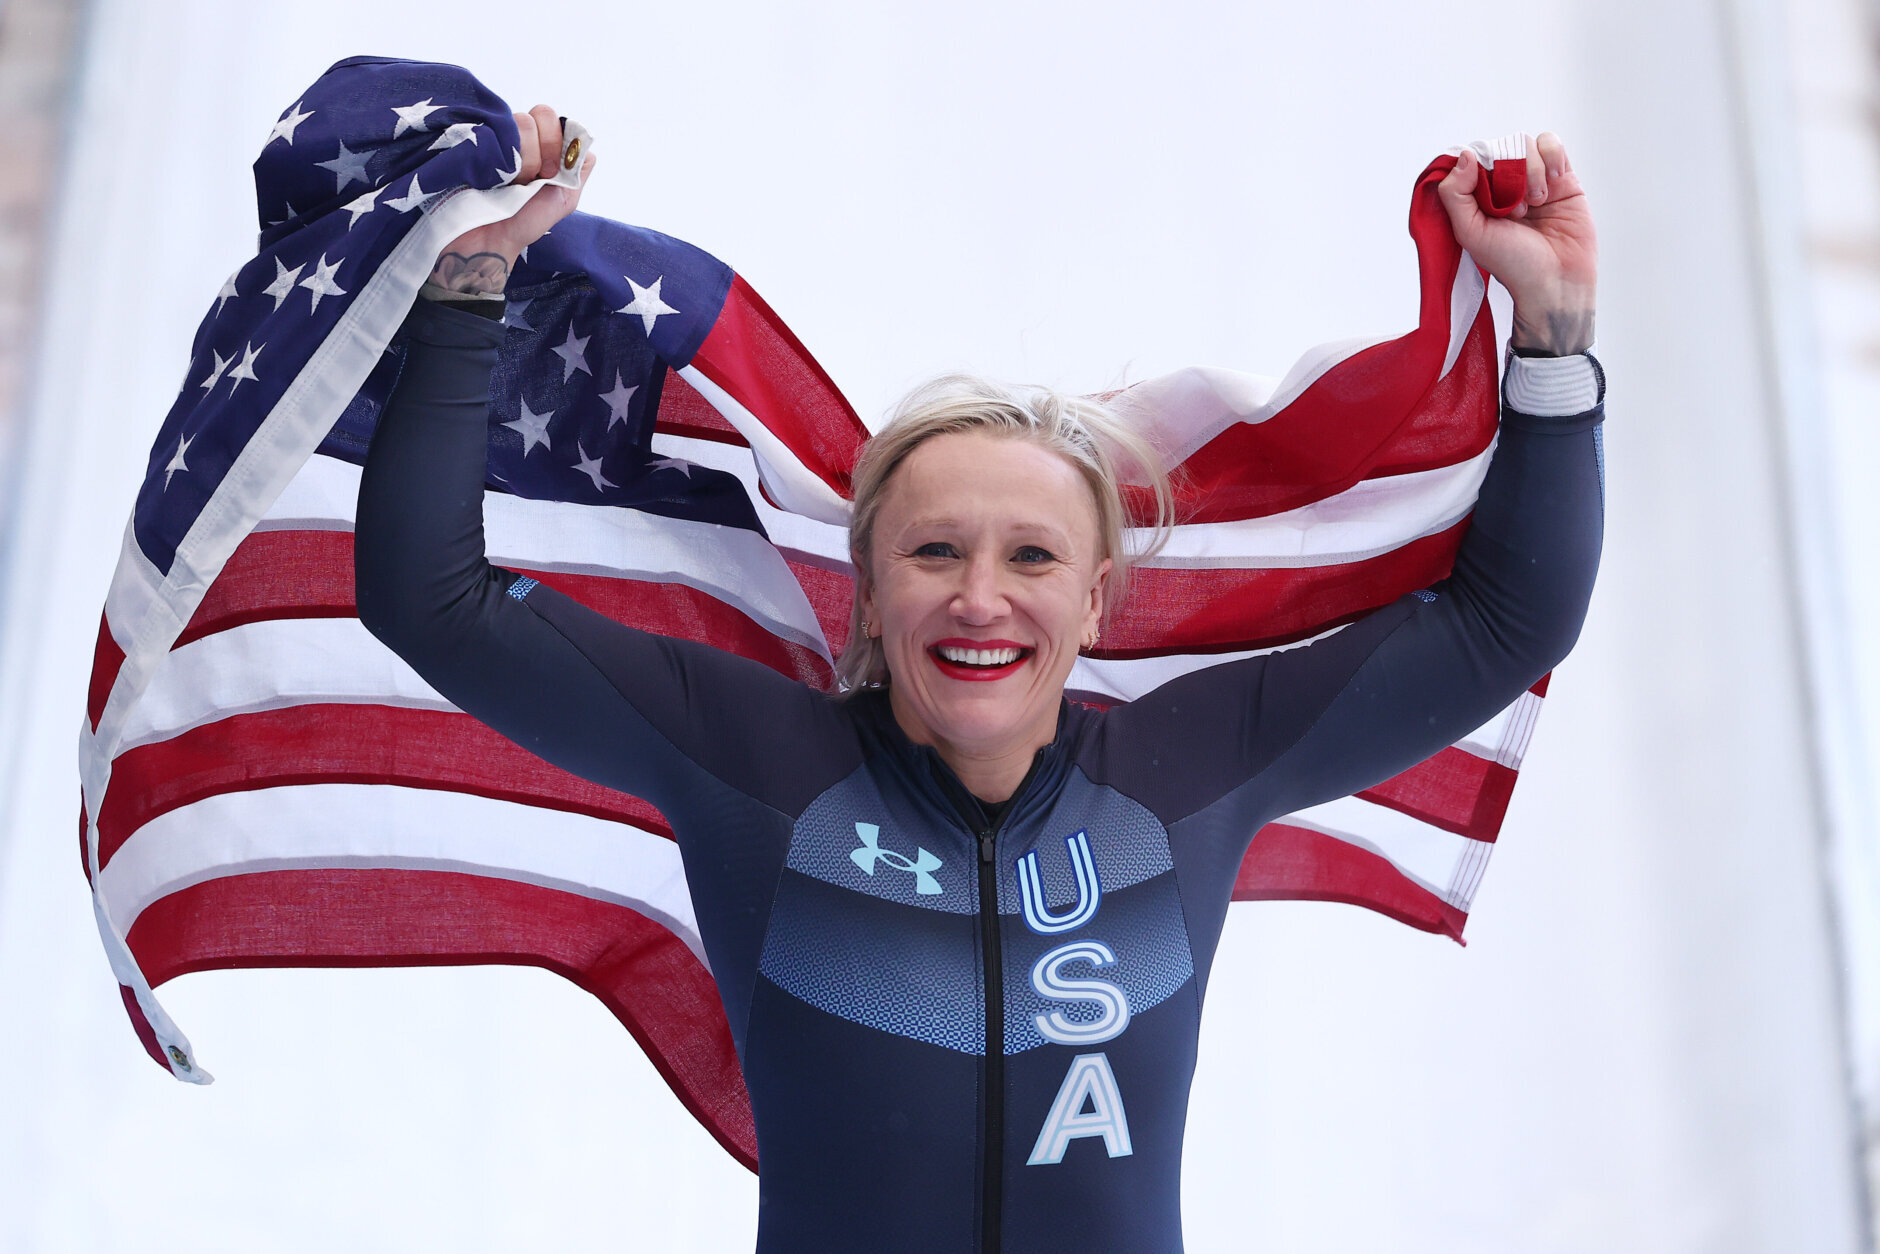 YANQING, CHINA - FEBRUARY 14:  Gold medallist Kaillie Humphries of Team United States celebrates during the Women's Monobob Bobsleigh Heat 4 on day 10 of Beijing 2022 Winter Olympic Games at National Sliding Centre on February 14, 2022 in Yanqing, China. (Photo by Julian Finney/Getty Images)